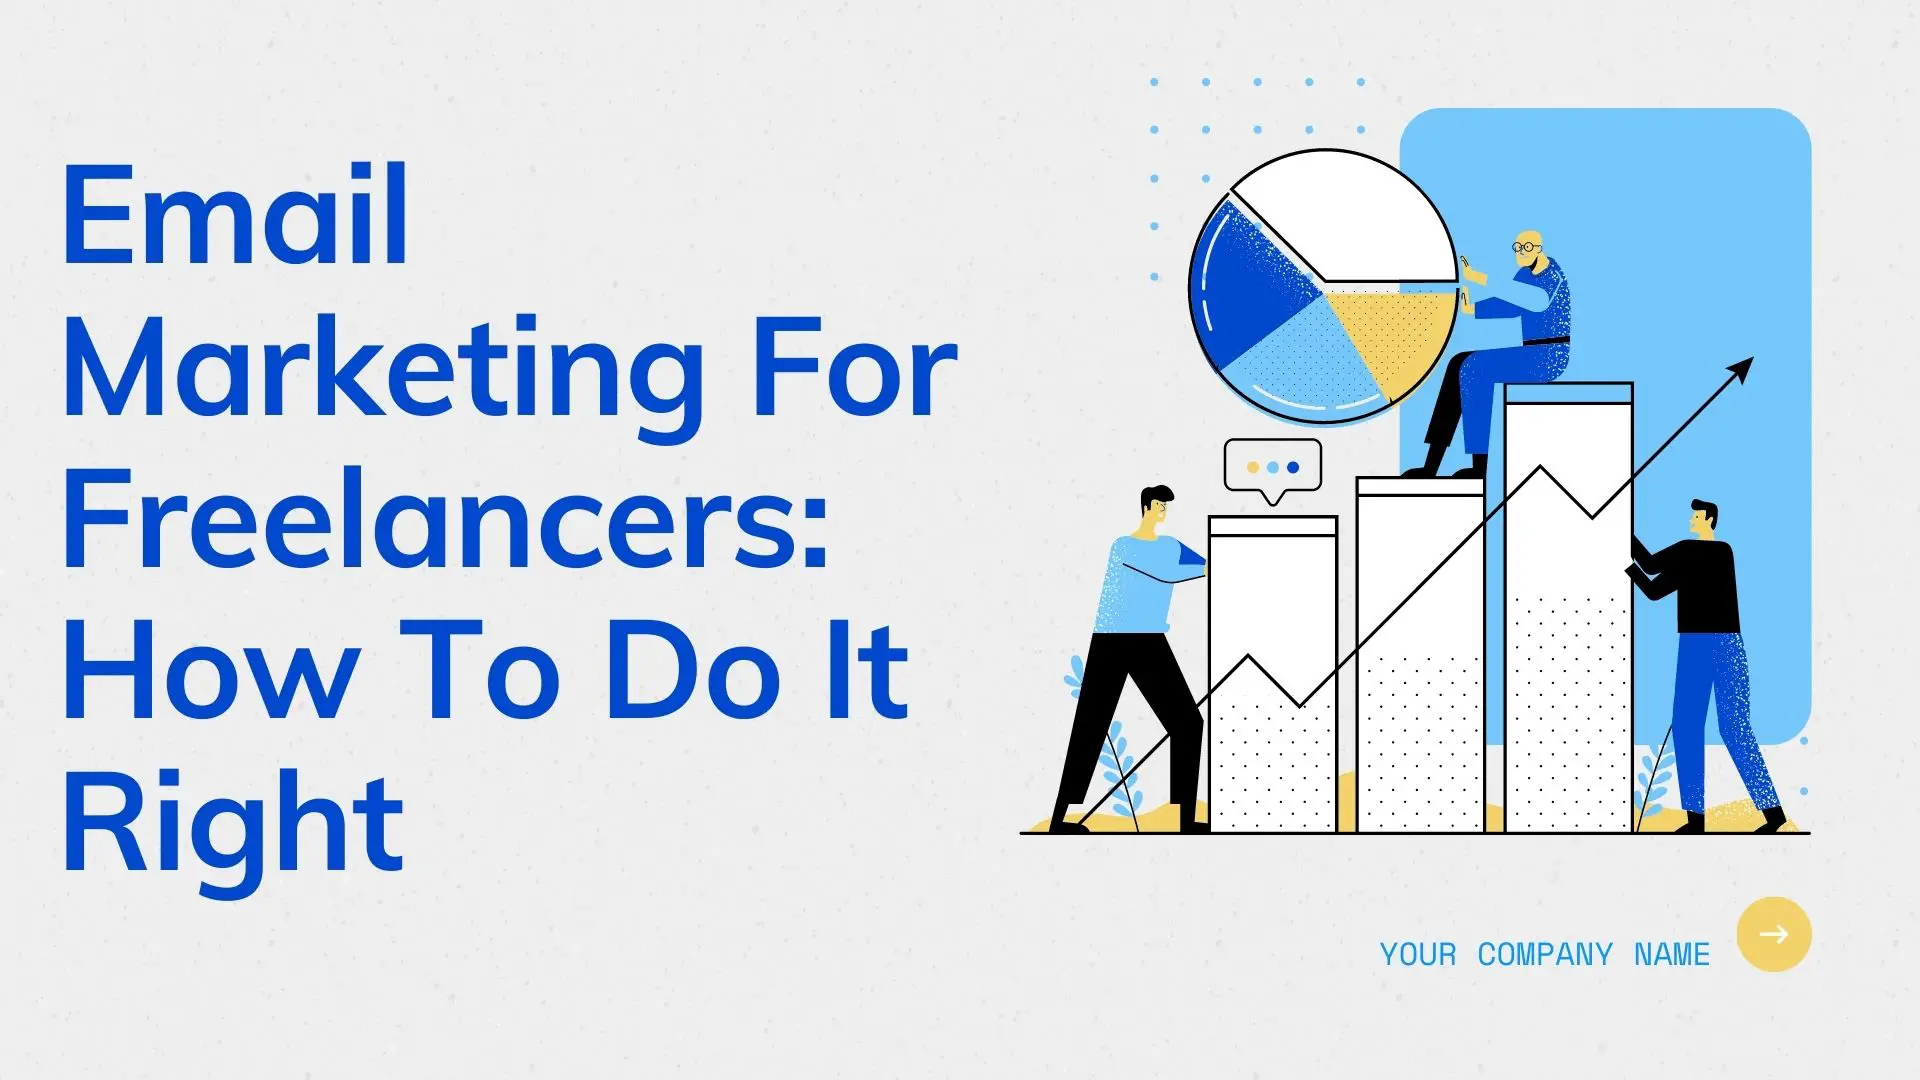 Email Marketing For Freelancers: How To Do It Right